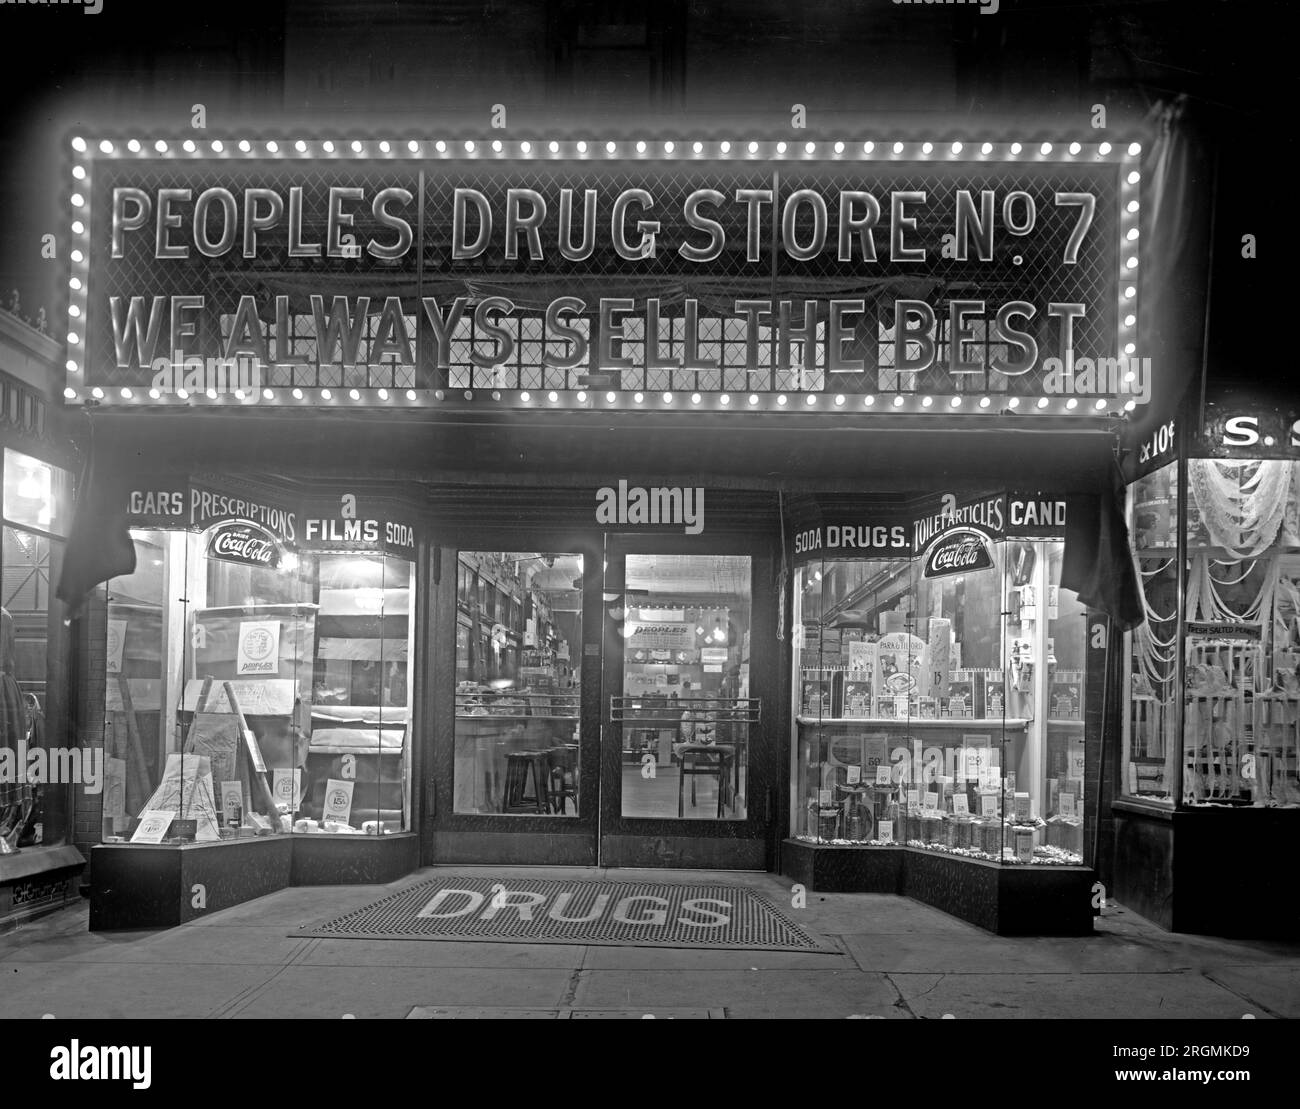 Peoples Drugs Store, 11th & G, [Washington, D.C.], at night ca. 1919 or 1920 Stock Photo